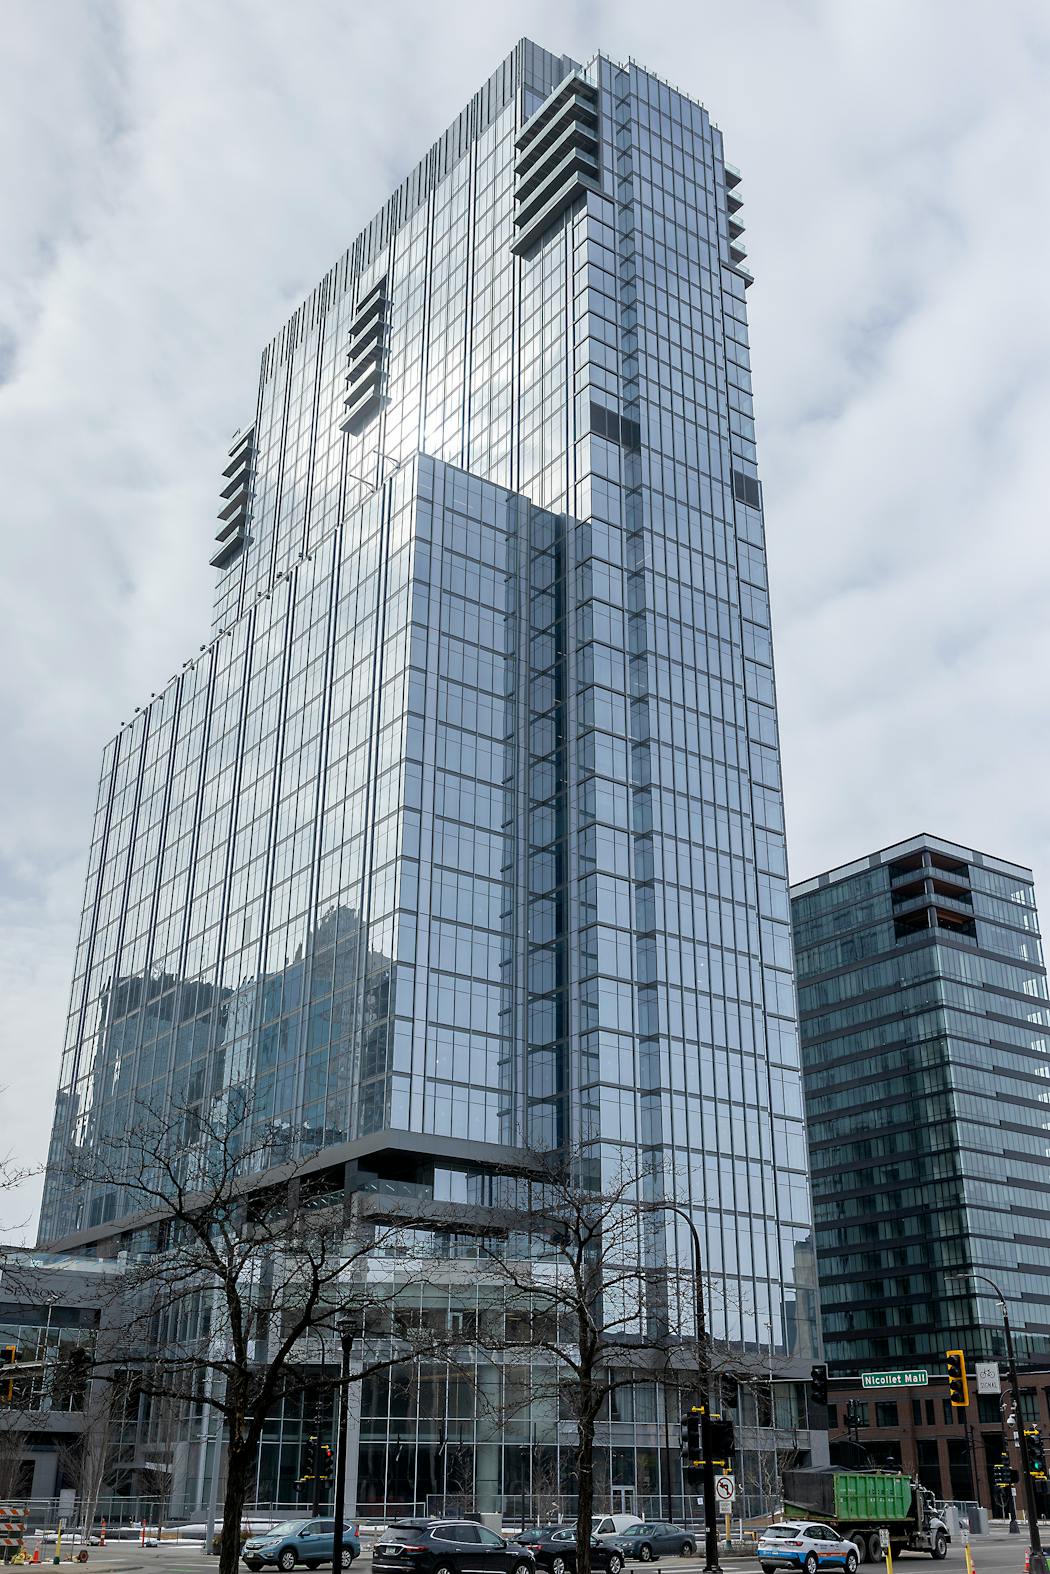 The RBC Gateway tower is the tallest new office building in Minneapolis since Capella Tower opened in the early 1990s.